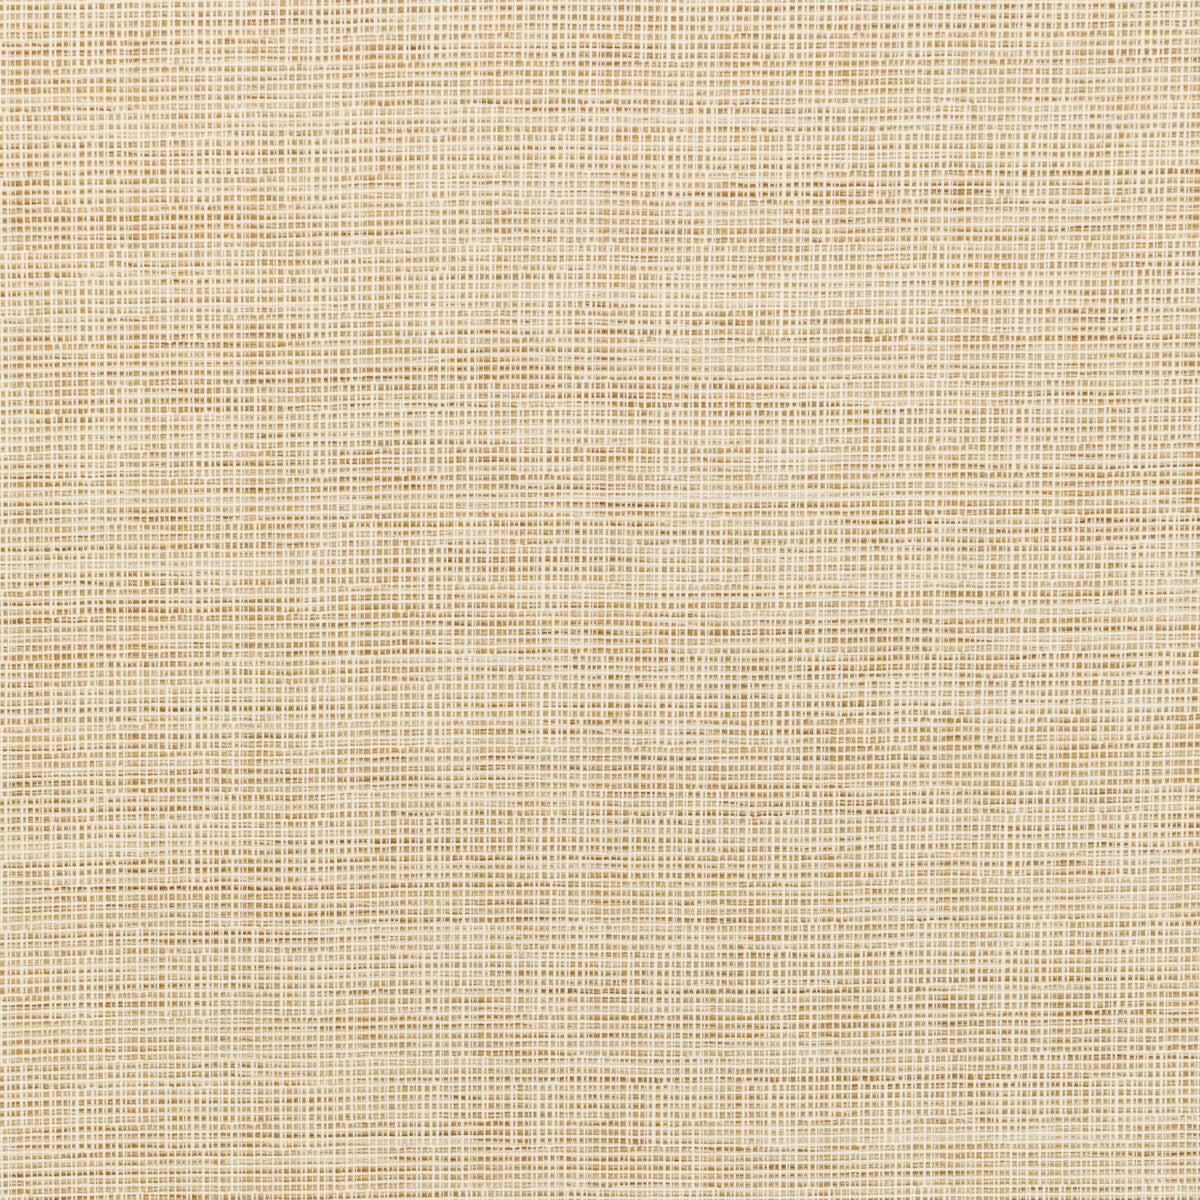 Kravet Smart fabric in 36303-16 color - pattern 36303.16.0 - by Kravet Smart in the Performance Crypton Home collection